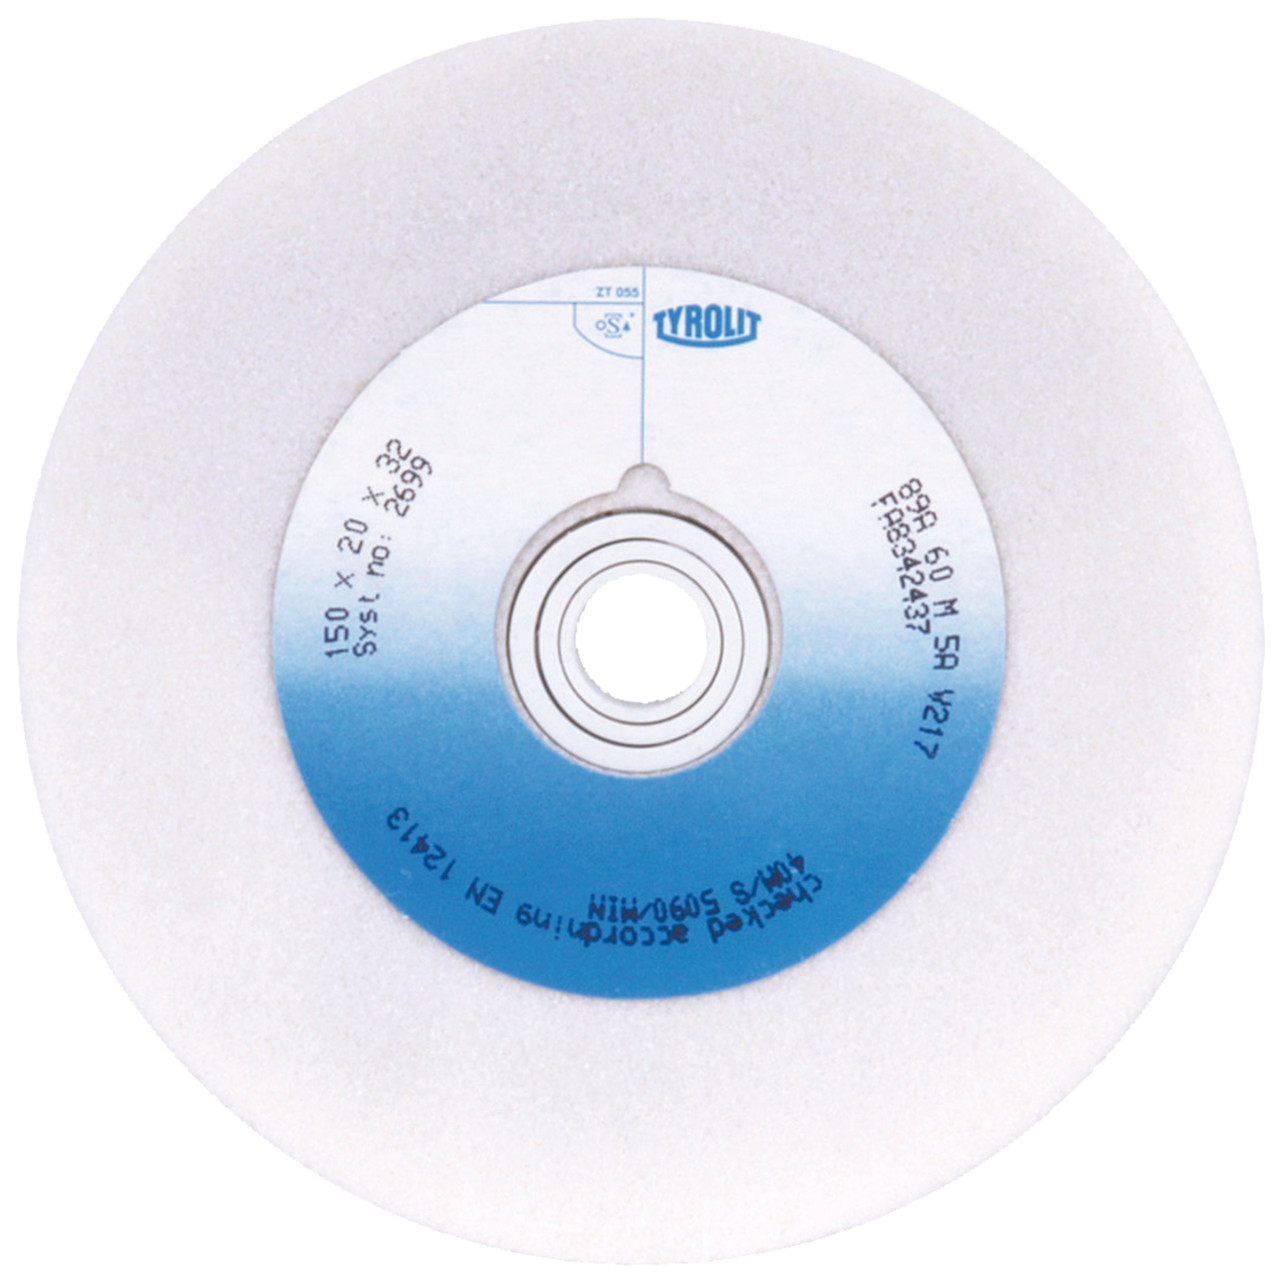 Tyrolit Conventional ceramic grinding discs DxDxH 200x32x40 For high-alloy steels and HSS, shape: 1, Art. 34046791